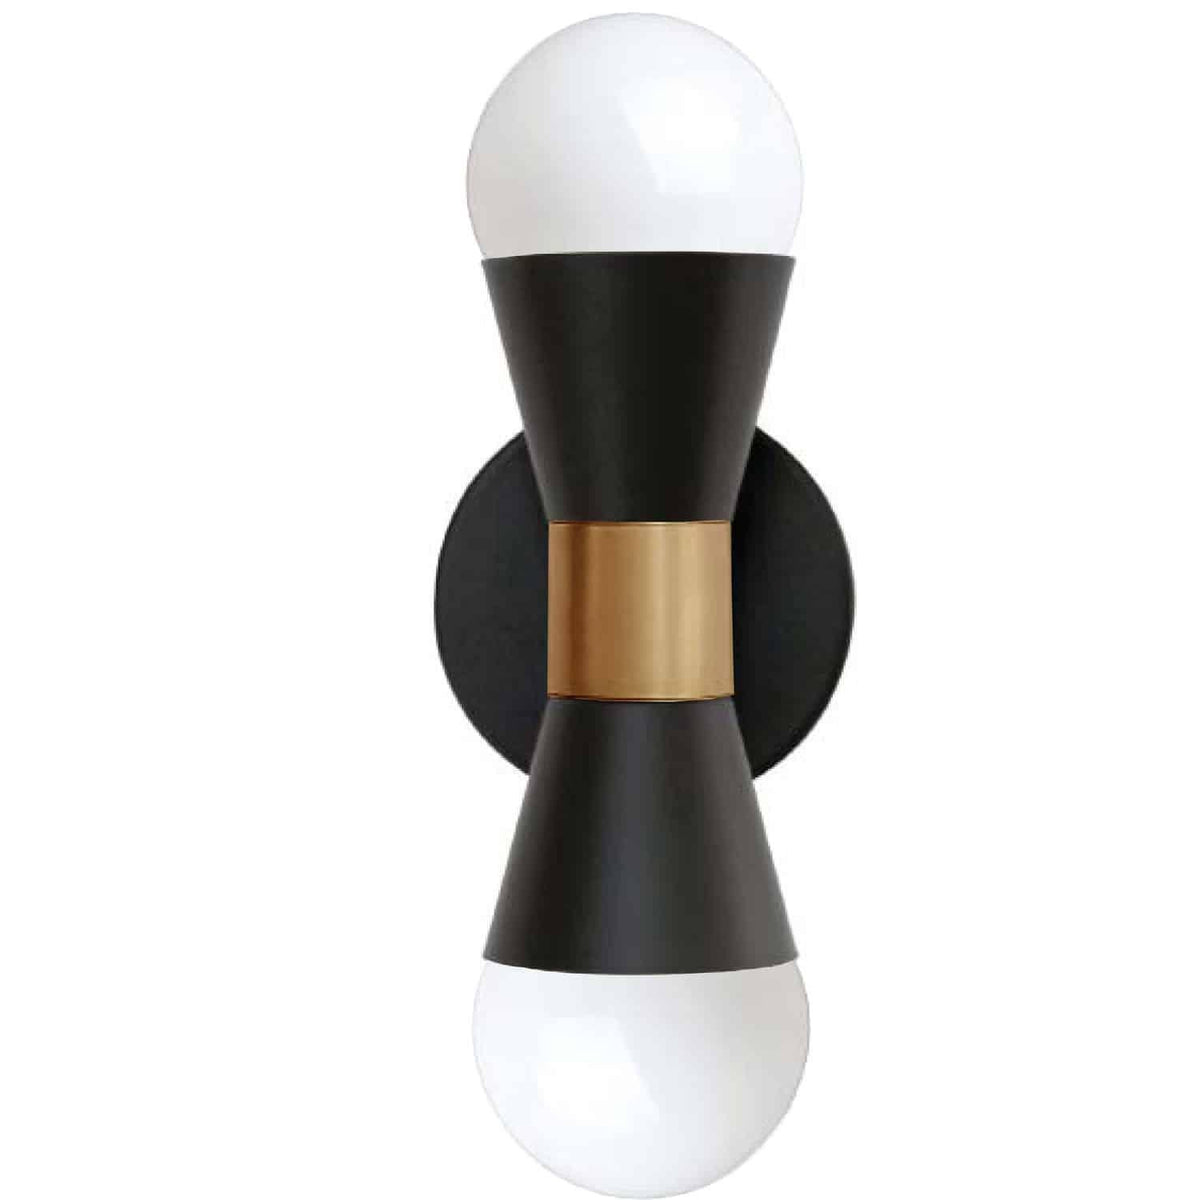 Dainolite - Fortuna Wall Sconce - FOR-72W-MB-AGB | Montreal Lighting & Hardware